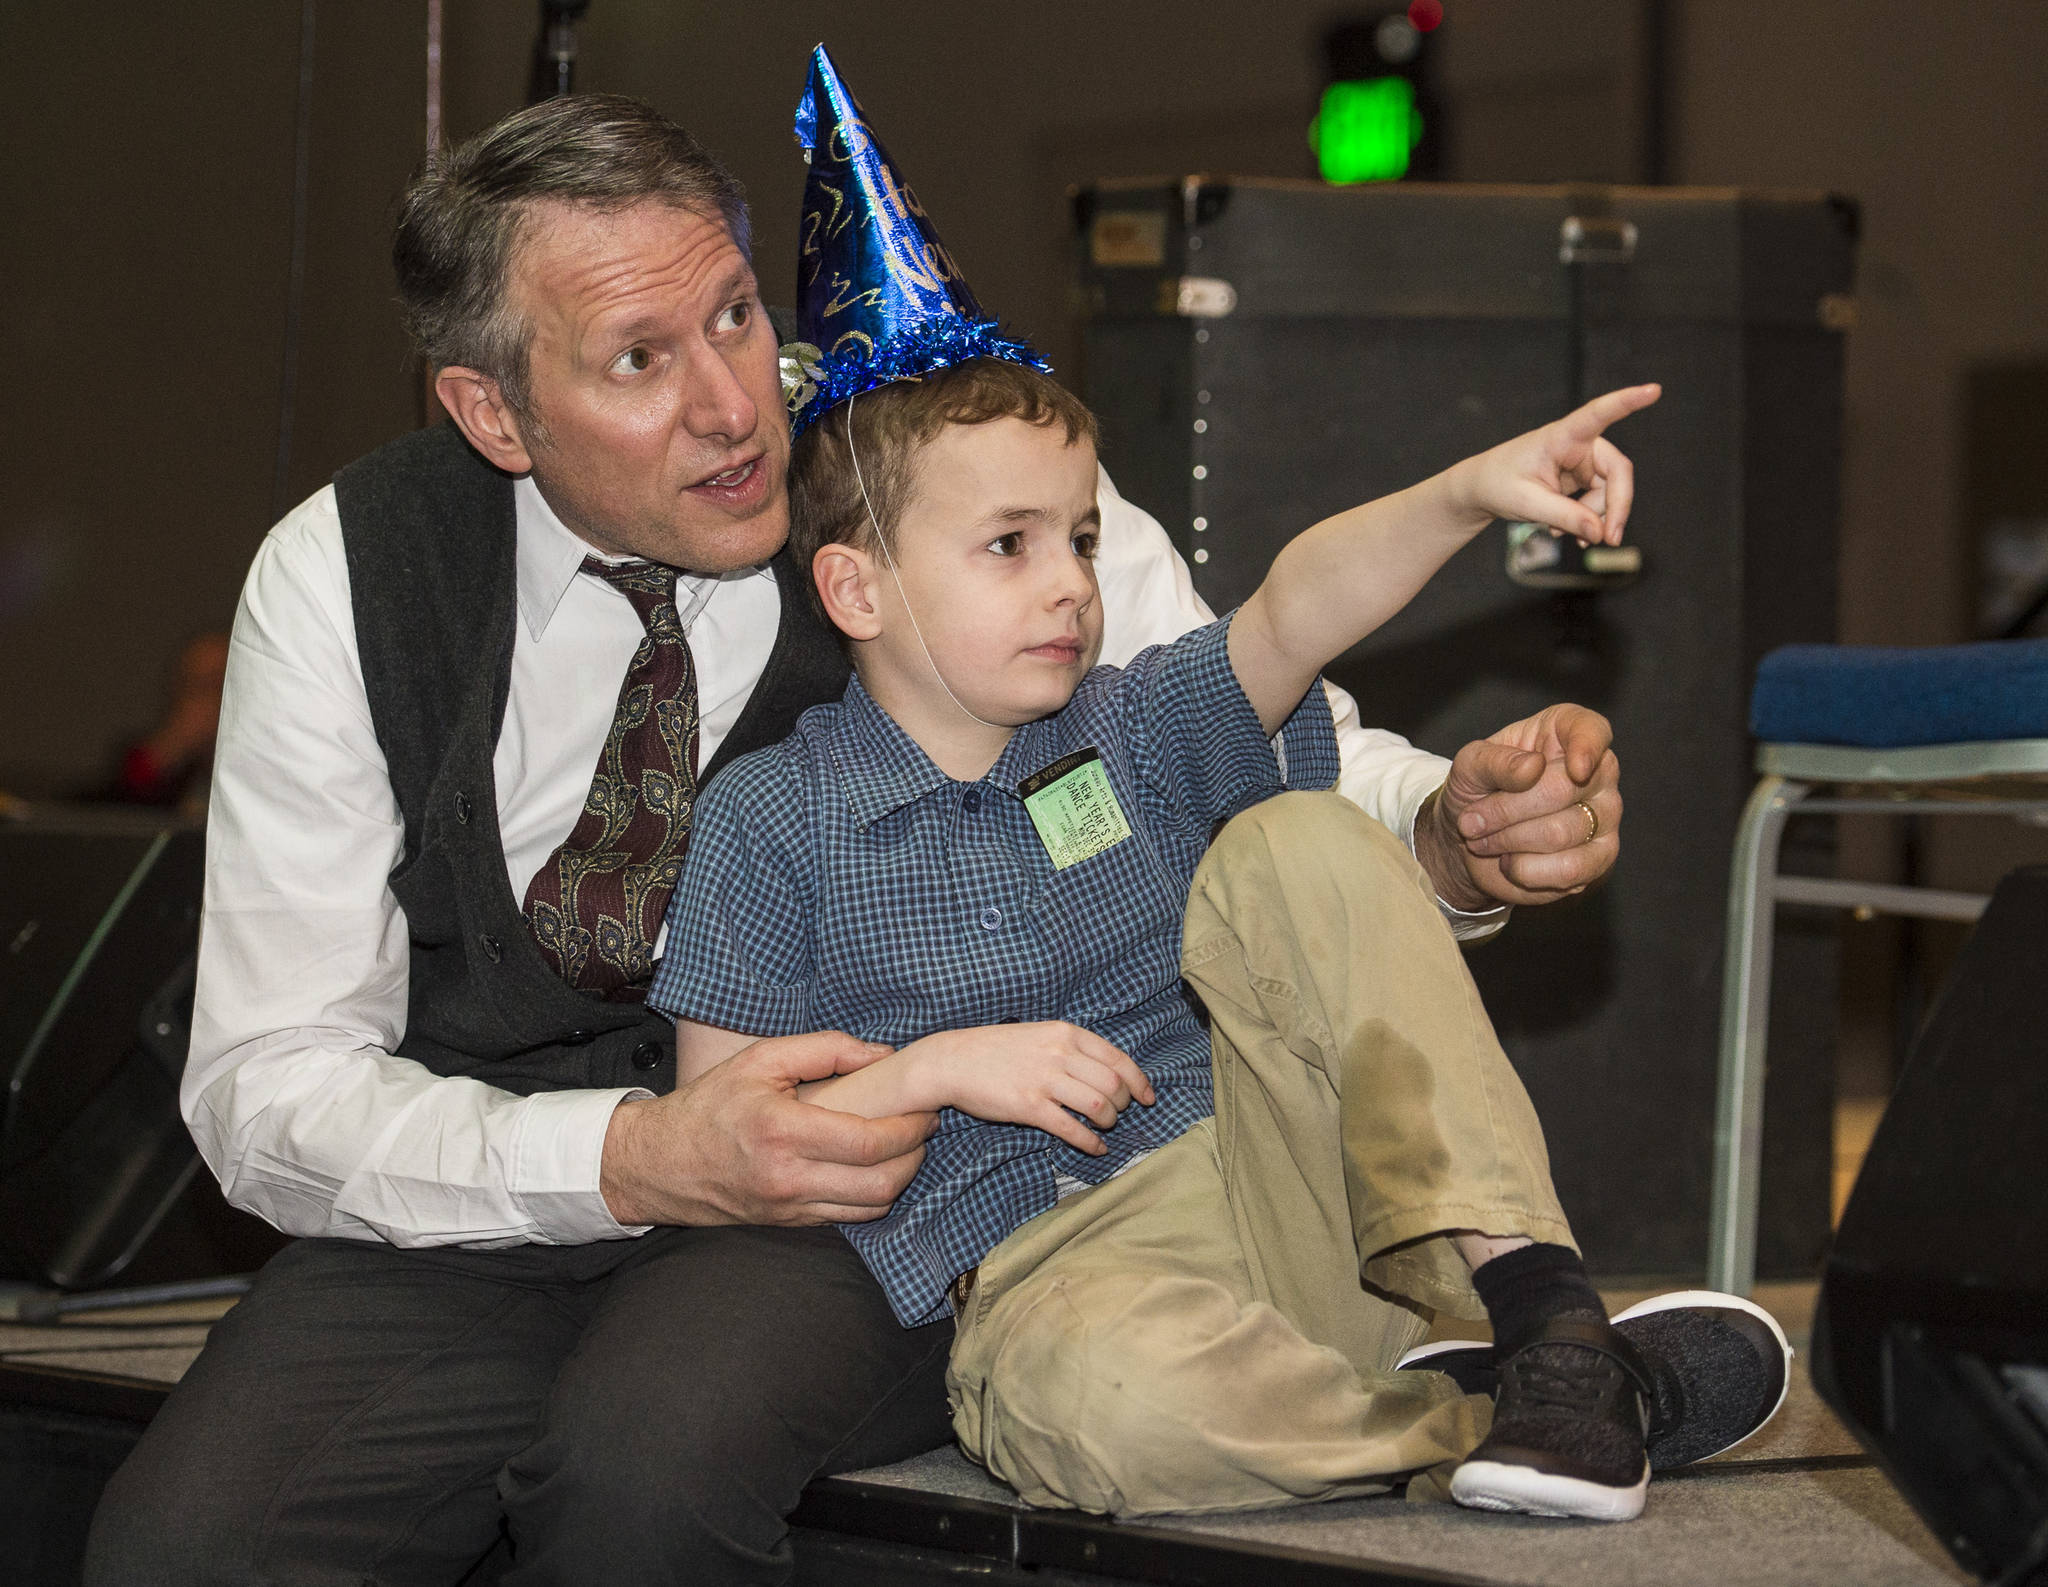 Sean Boily watches the activities with his son, Axel, 9, at the New Year’s Eve Gala at Centennial Hall on Monday, Dec. 31, 2018. The event was a fundraiser for the Juneau Arts and Humanities Council and Juneau Jazz & Classics. (Michael Penn | Juneau Empire)